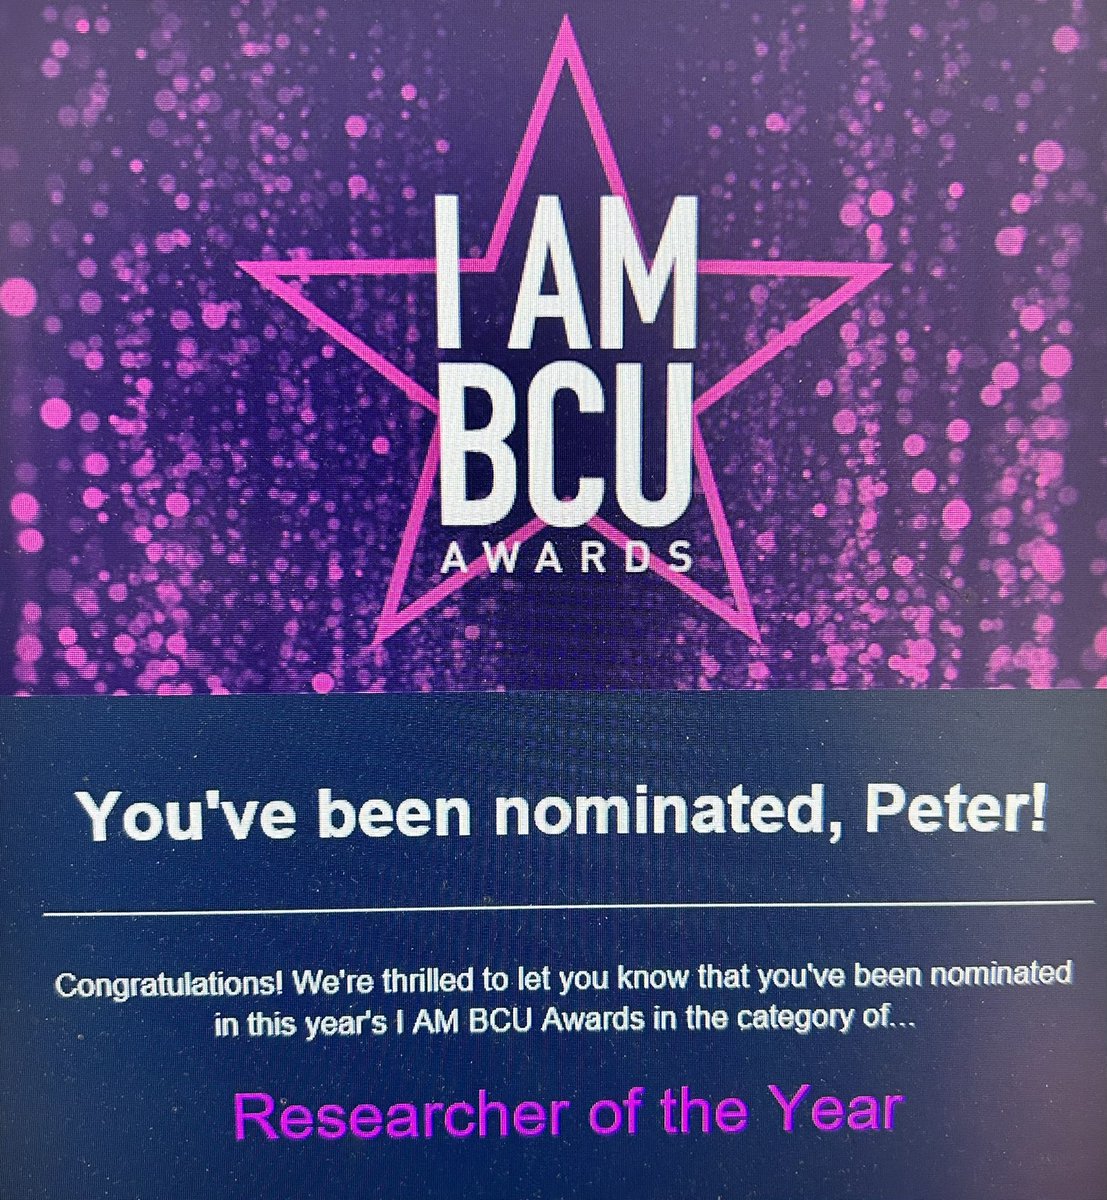 Well this was a very nice surprise. Huge thanks to whoever it was that nominated me for this @MyBCU award.